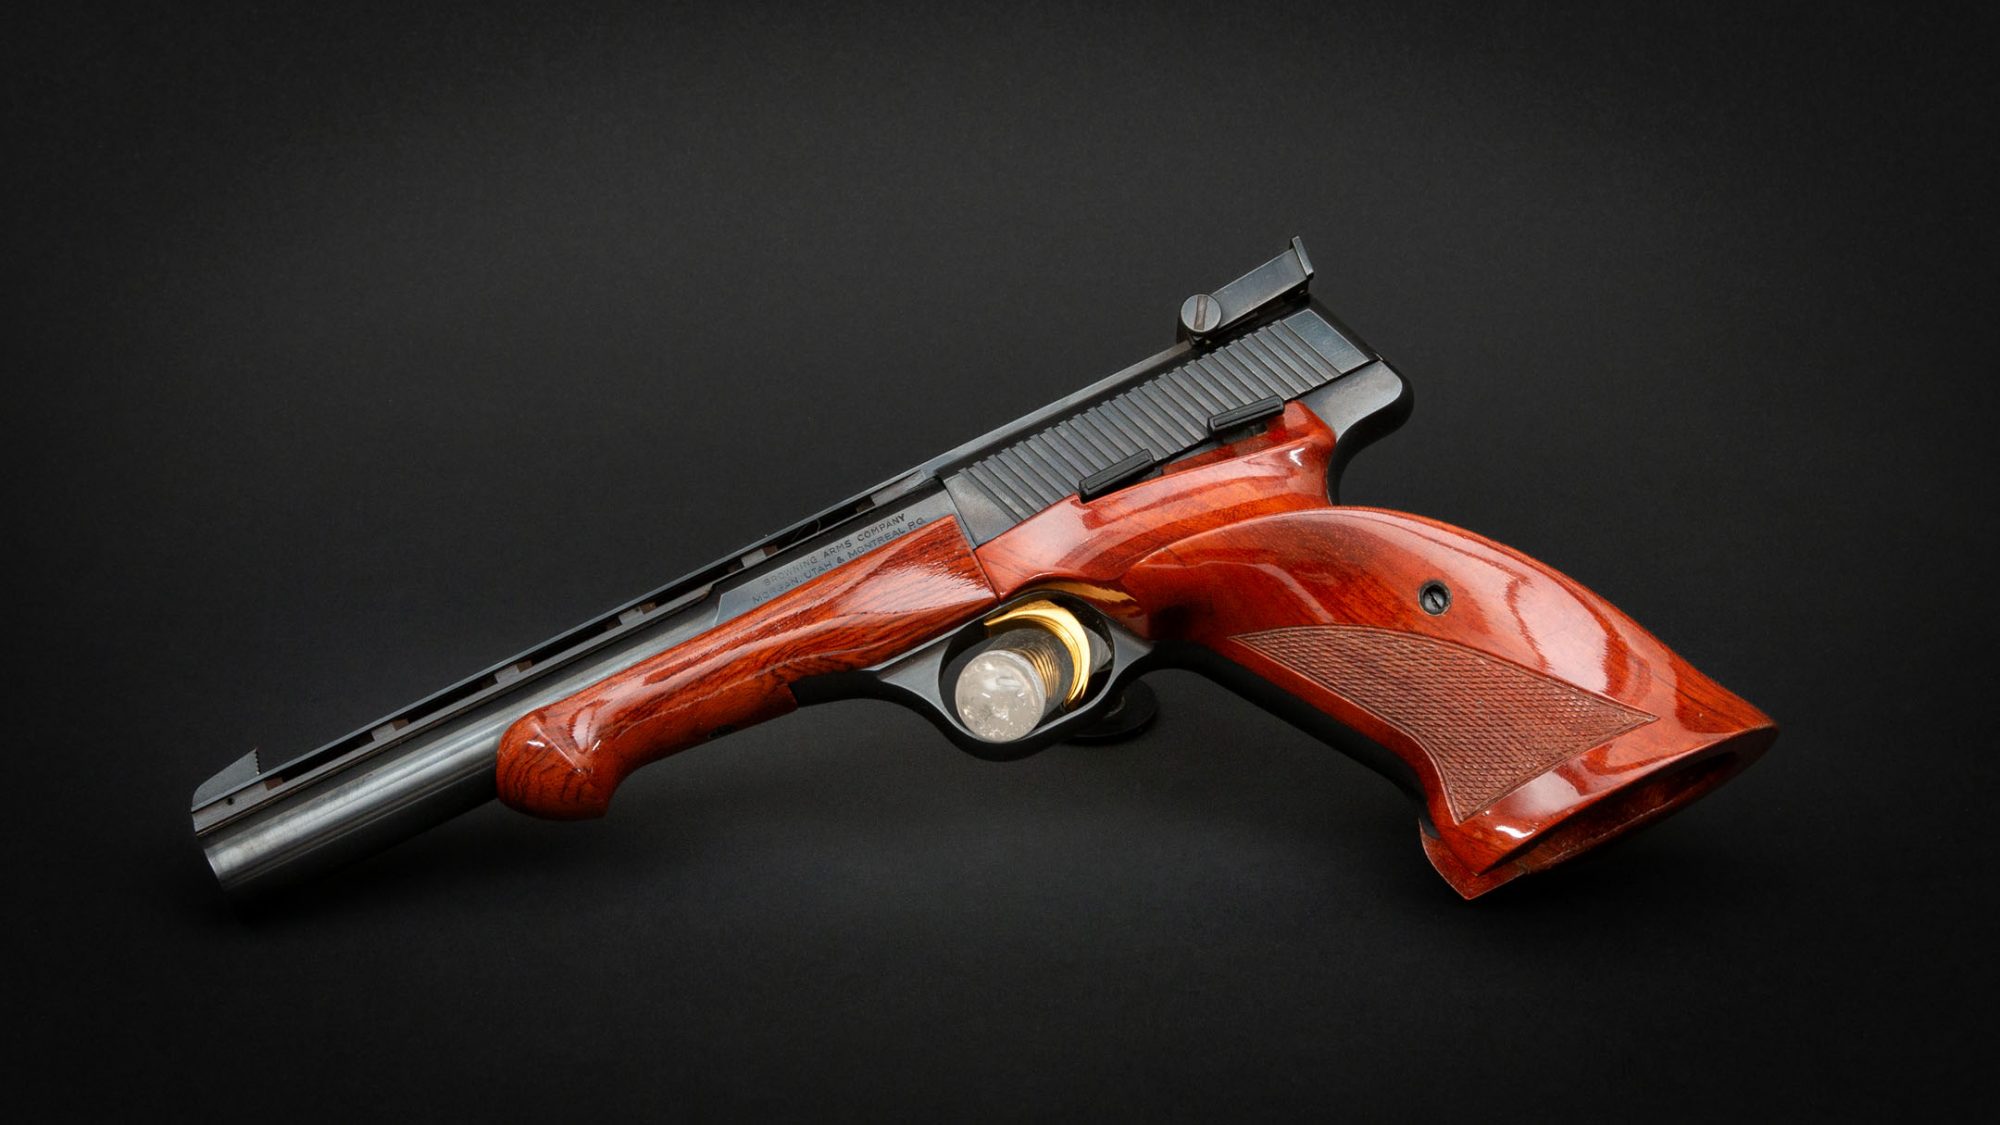 Browning Medalist in 22 LR, for sale by Turnbull Restoration Co. of Bloomfield, NY